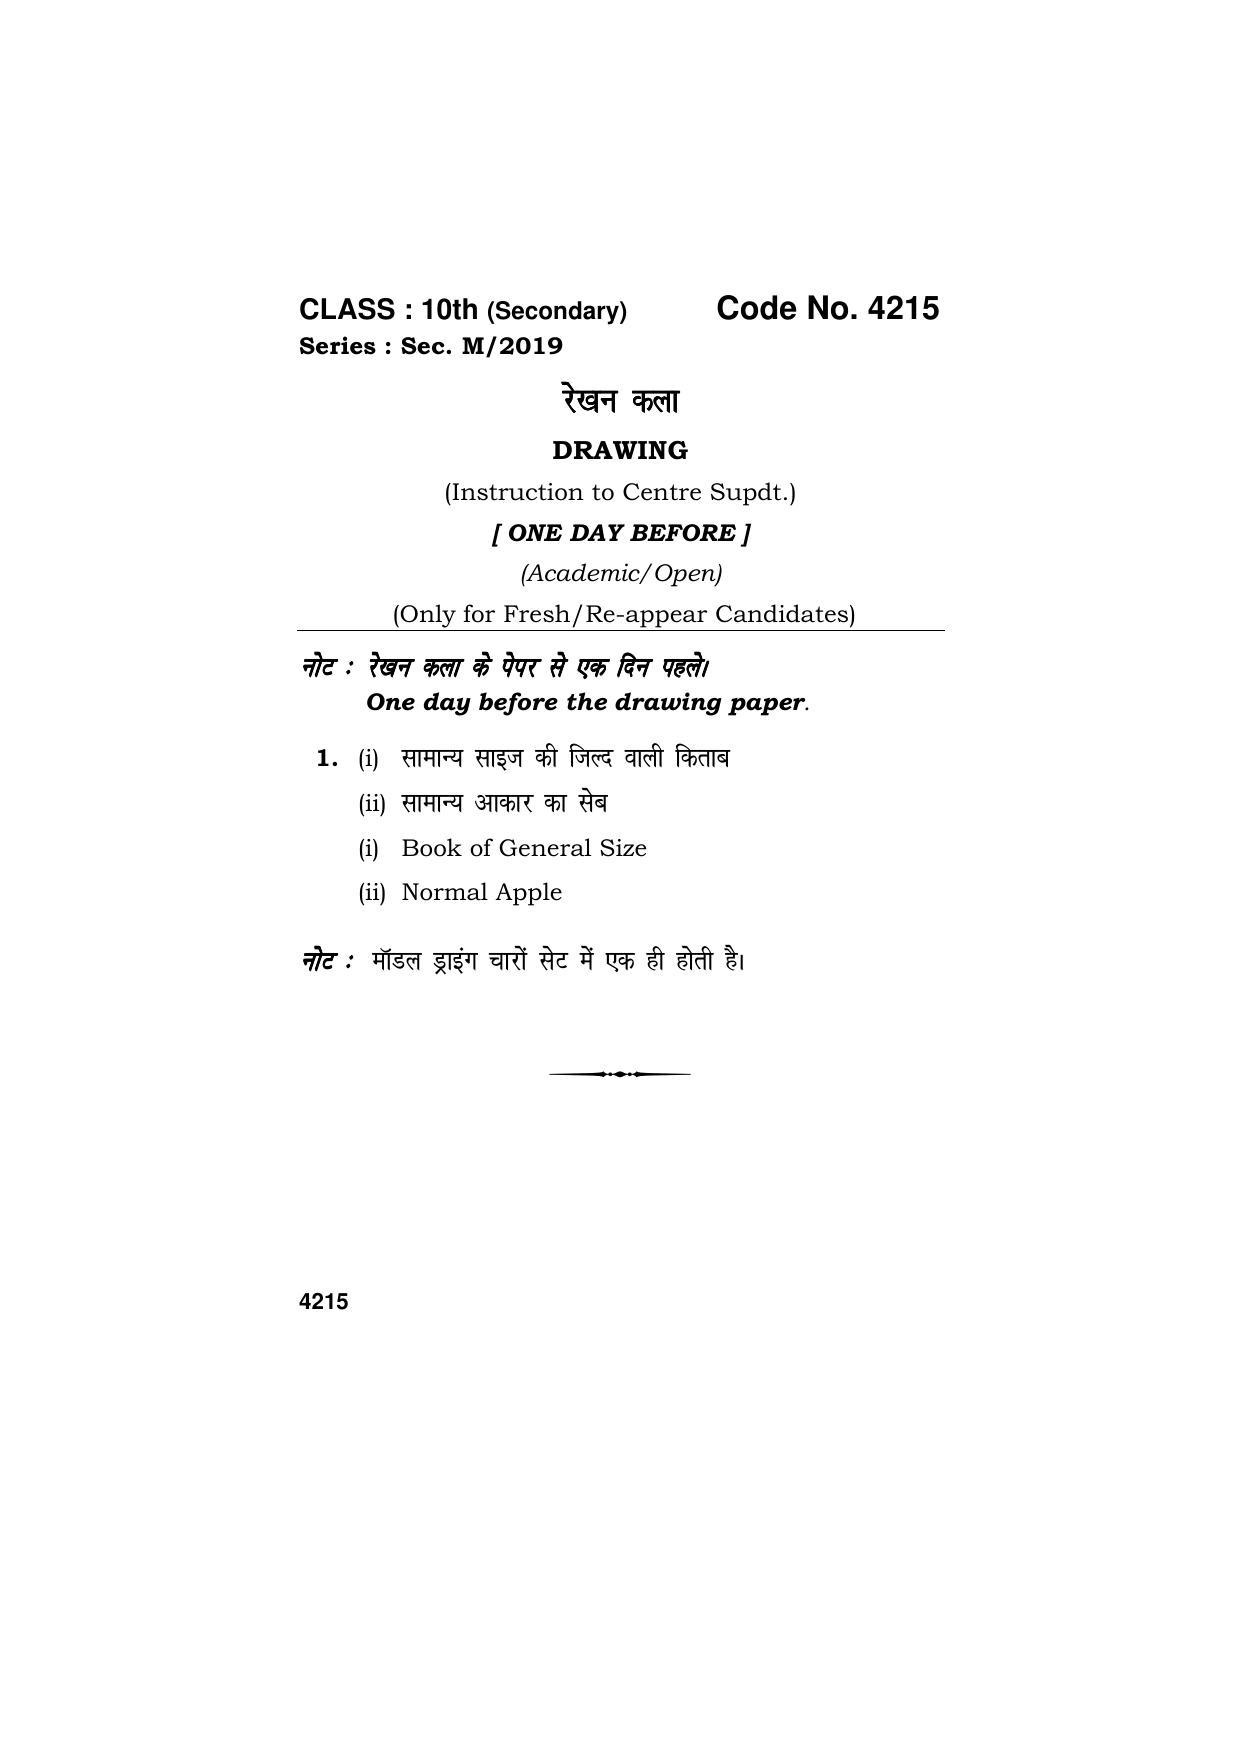 Haryana Board HBSE Class 10 Drawing Instruction One Day 2019 Question Paper - Page 1